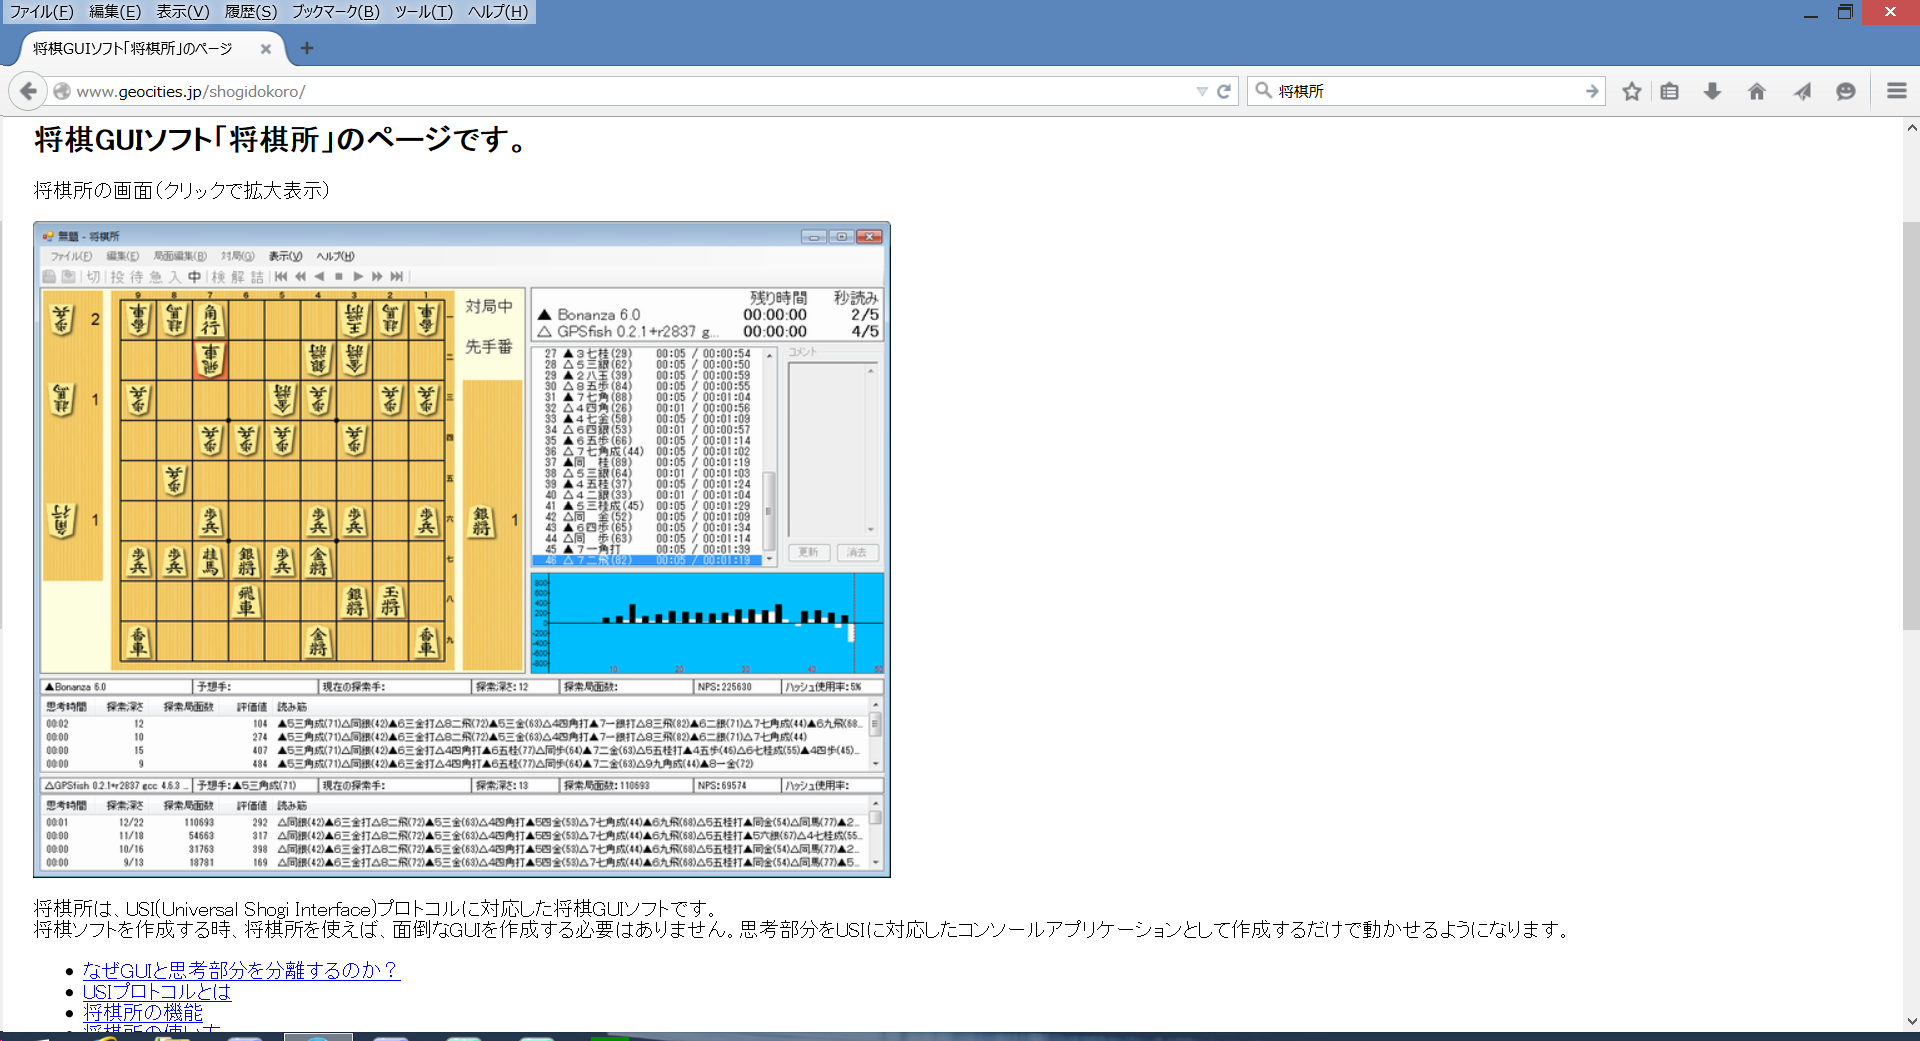 pictures/shogidokoro_website.png